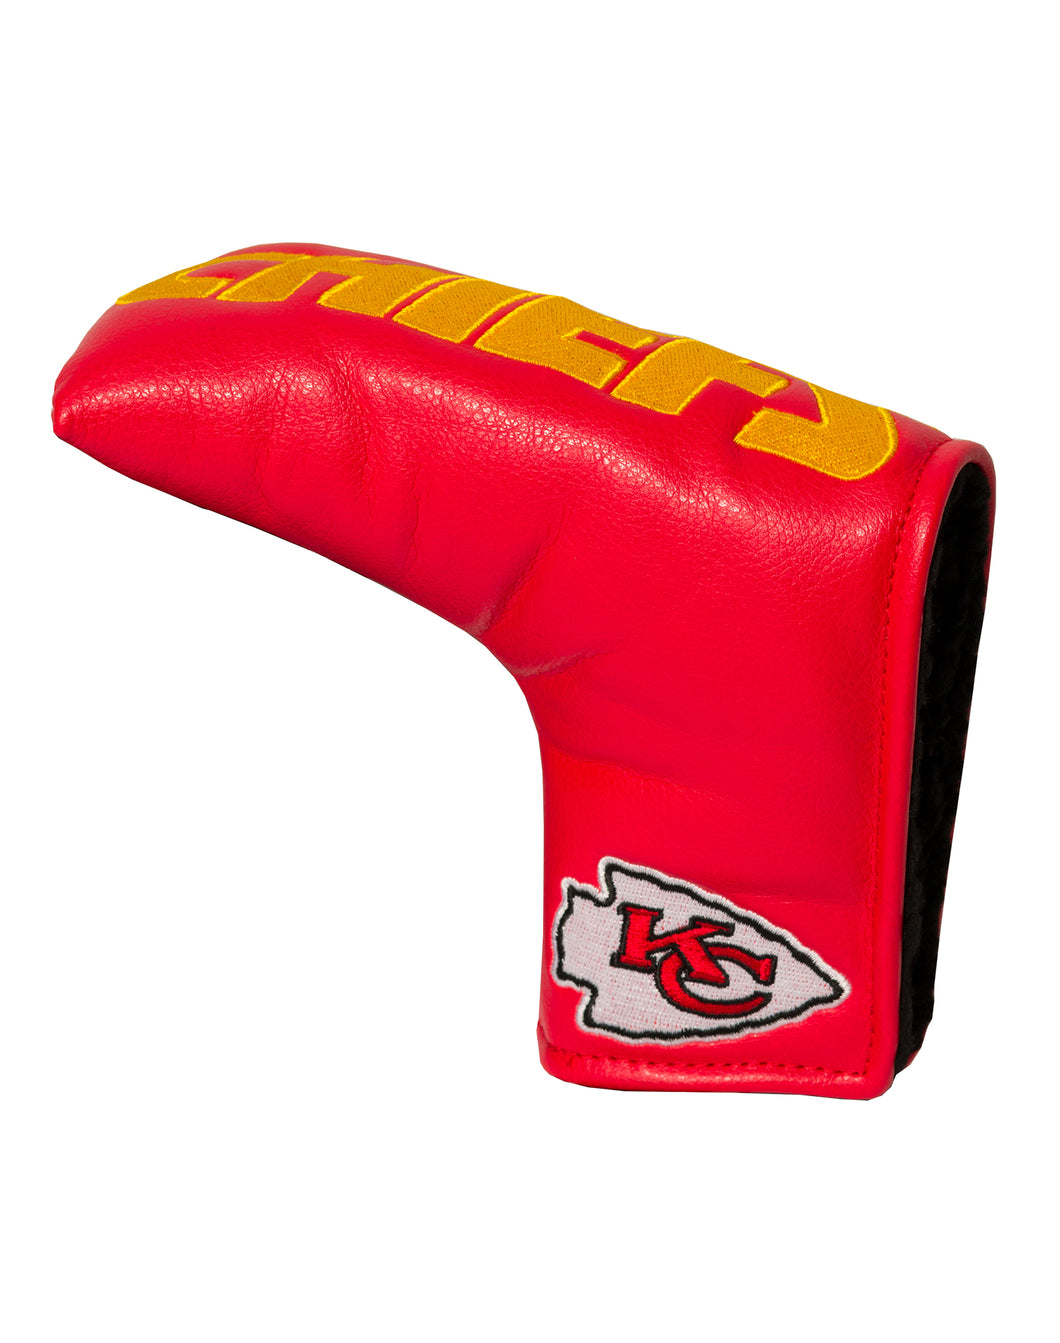 NFL Official Vintage Golf Blade Style Putter Headcover. Kansas City Chiefs.